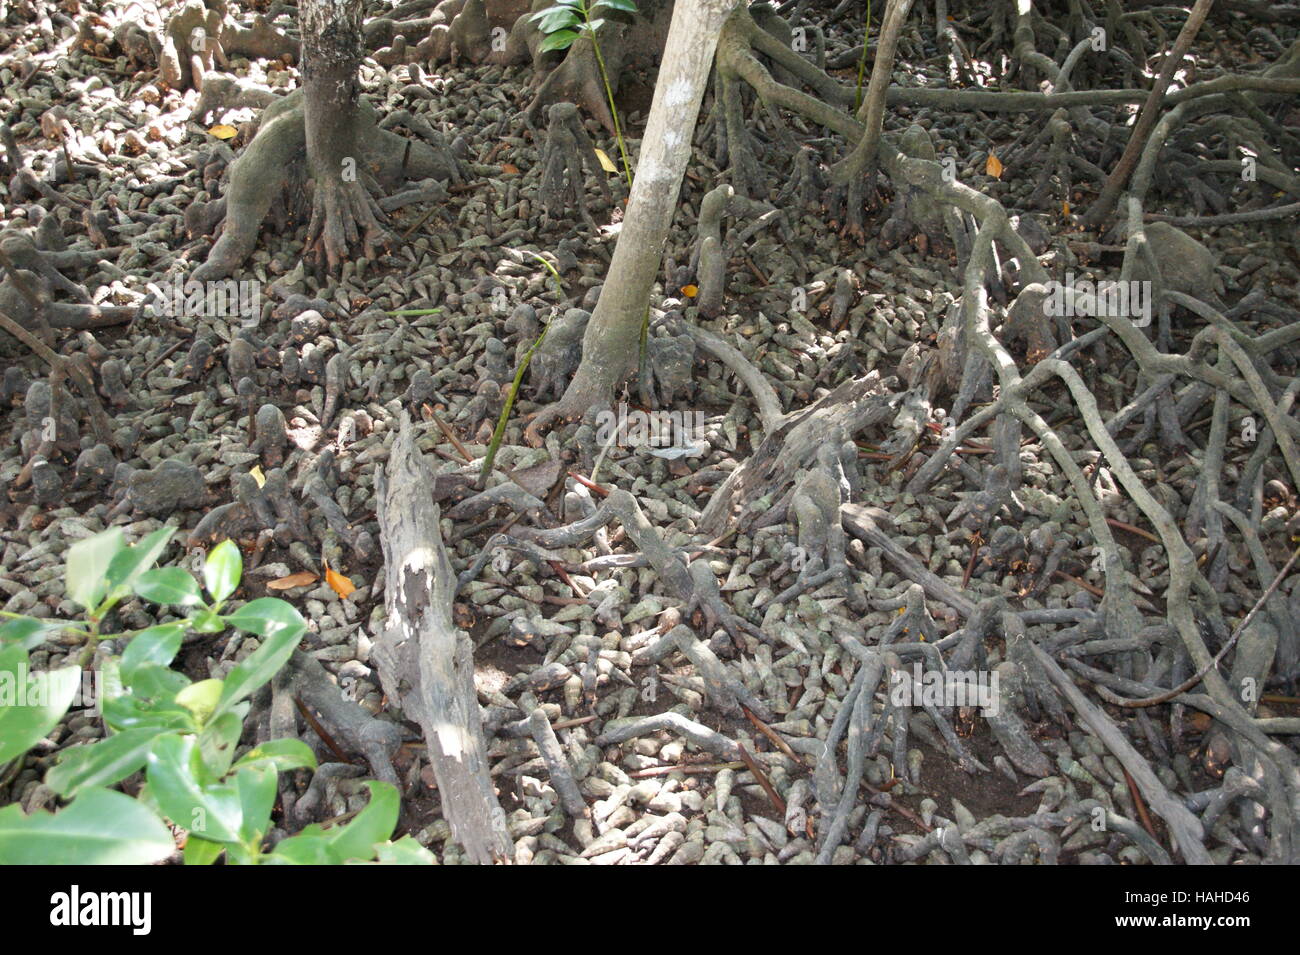 A lot of sea shells between mangrove roots. Seychelles, Curieuse Island, Indian ocean Stock Photo